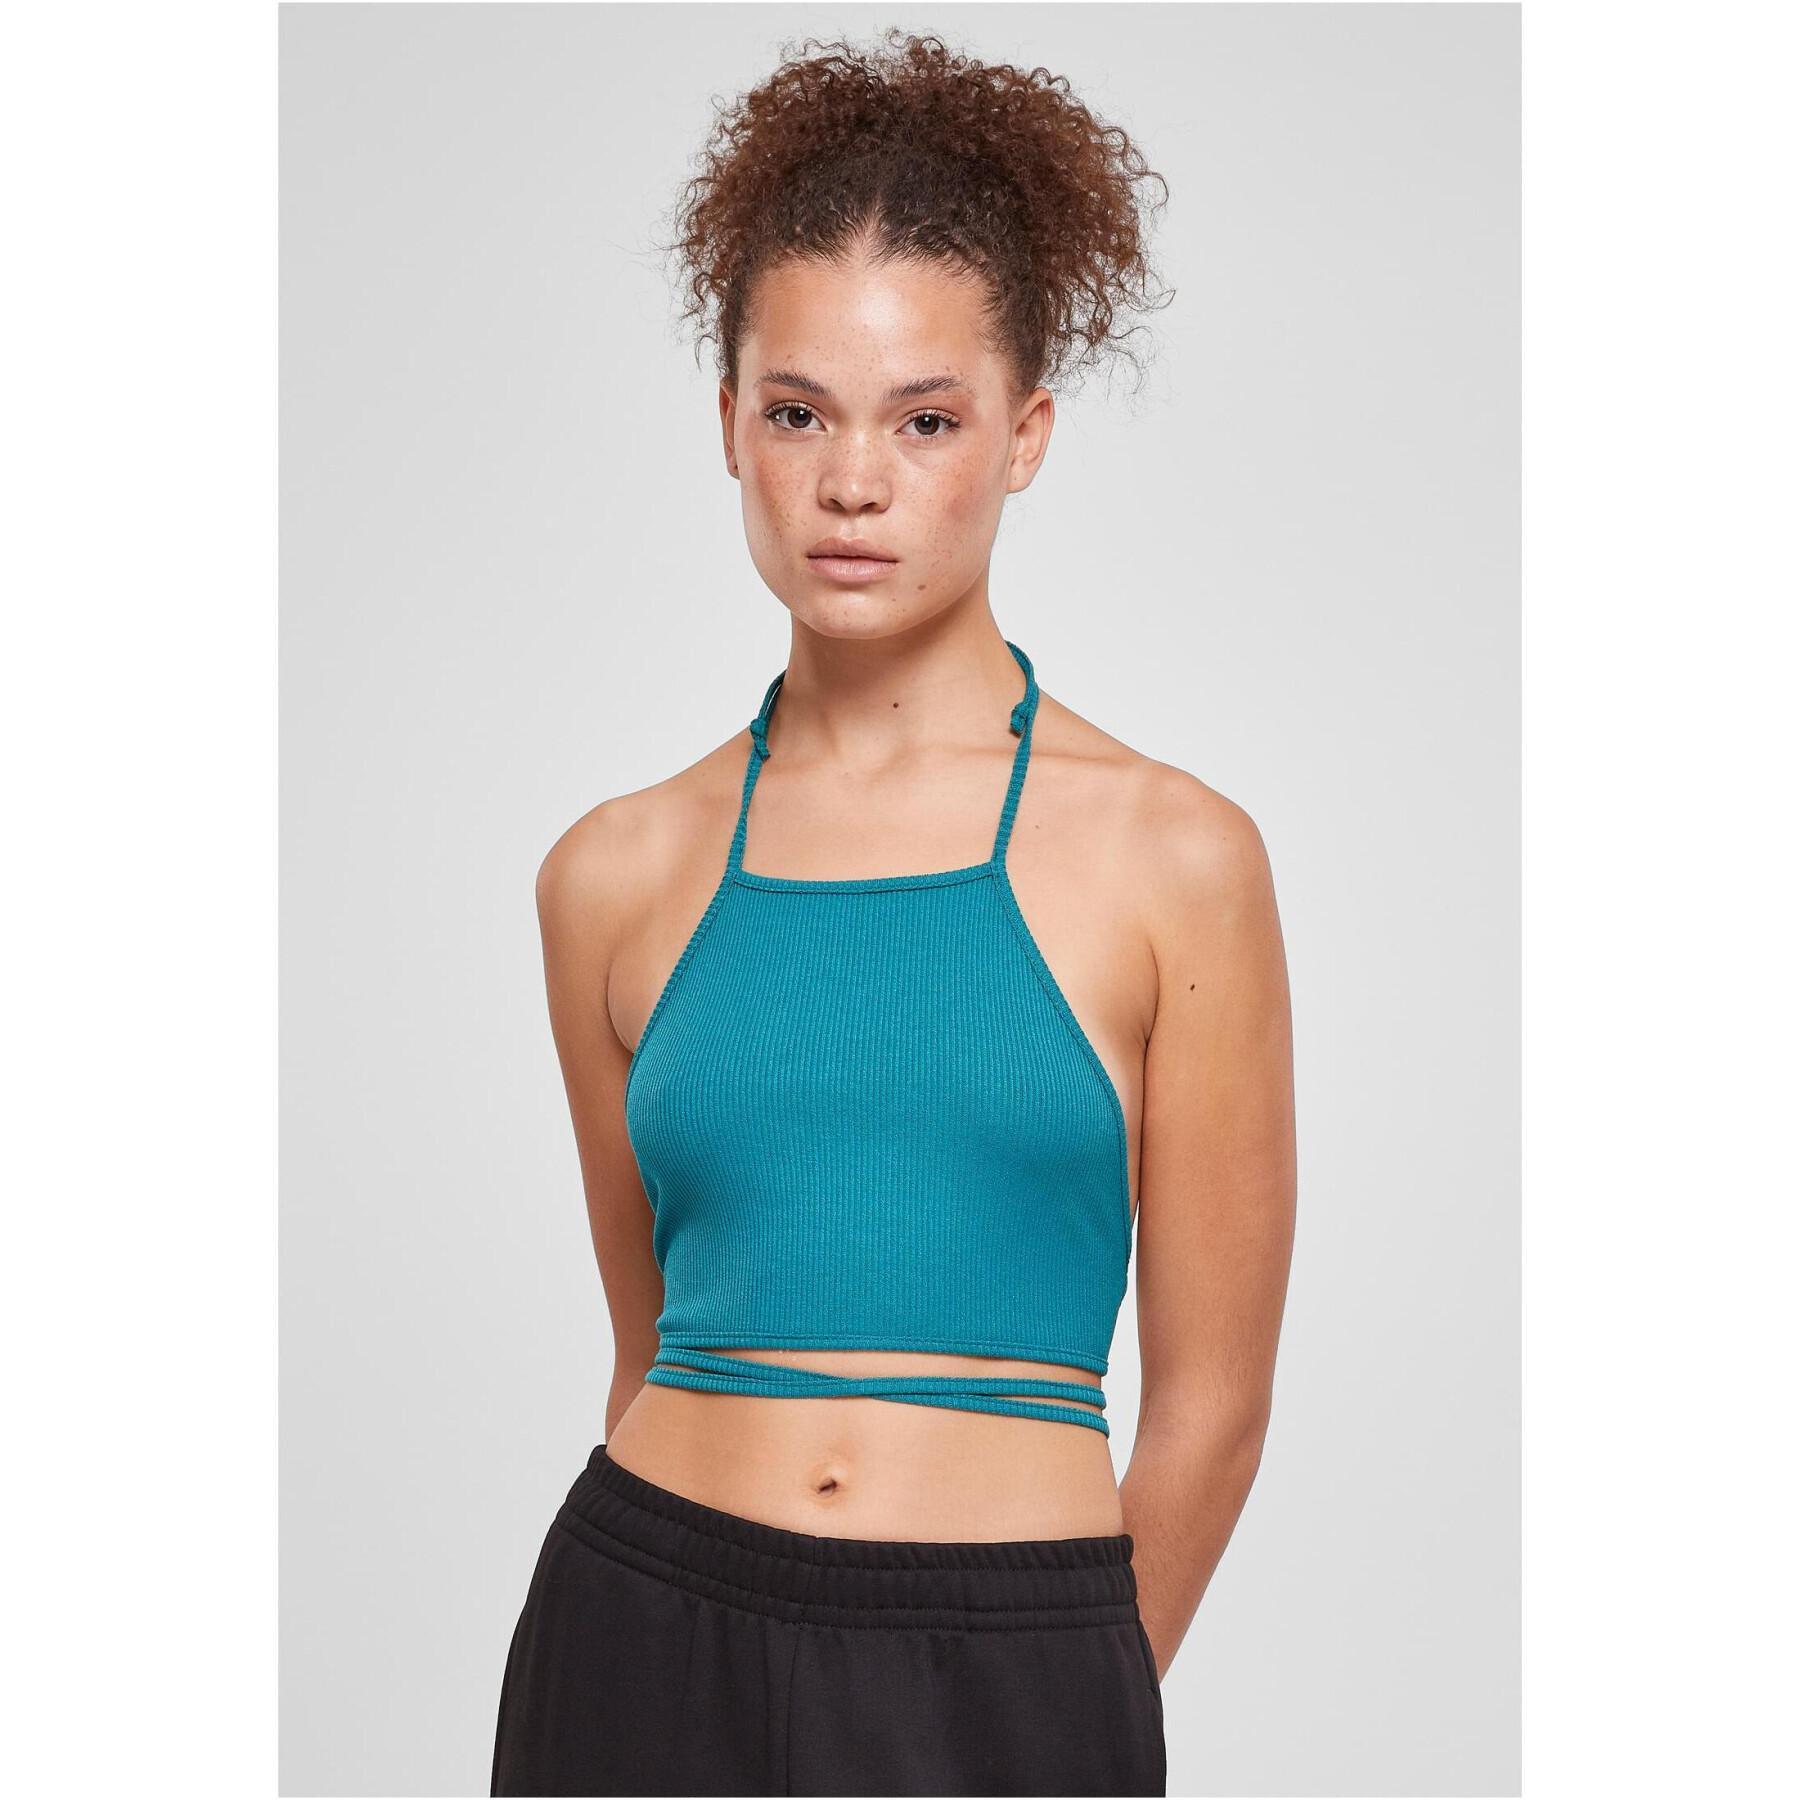 Large size ribbed crop top for women Urban Classics